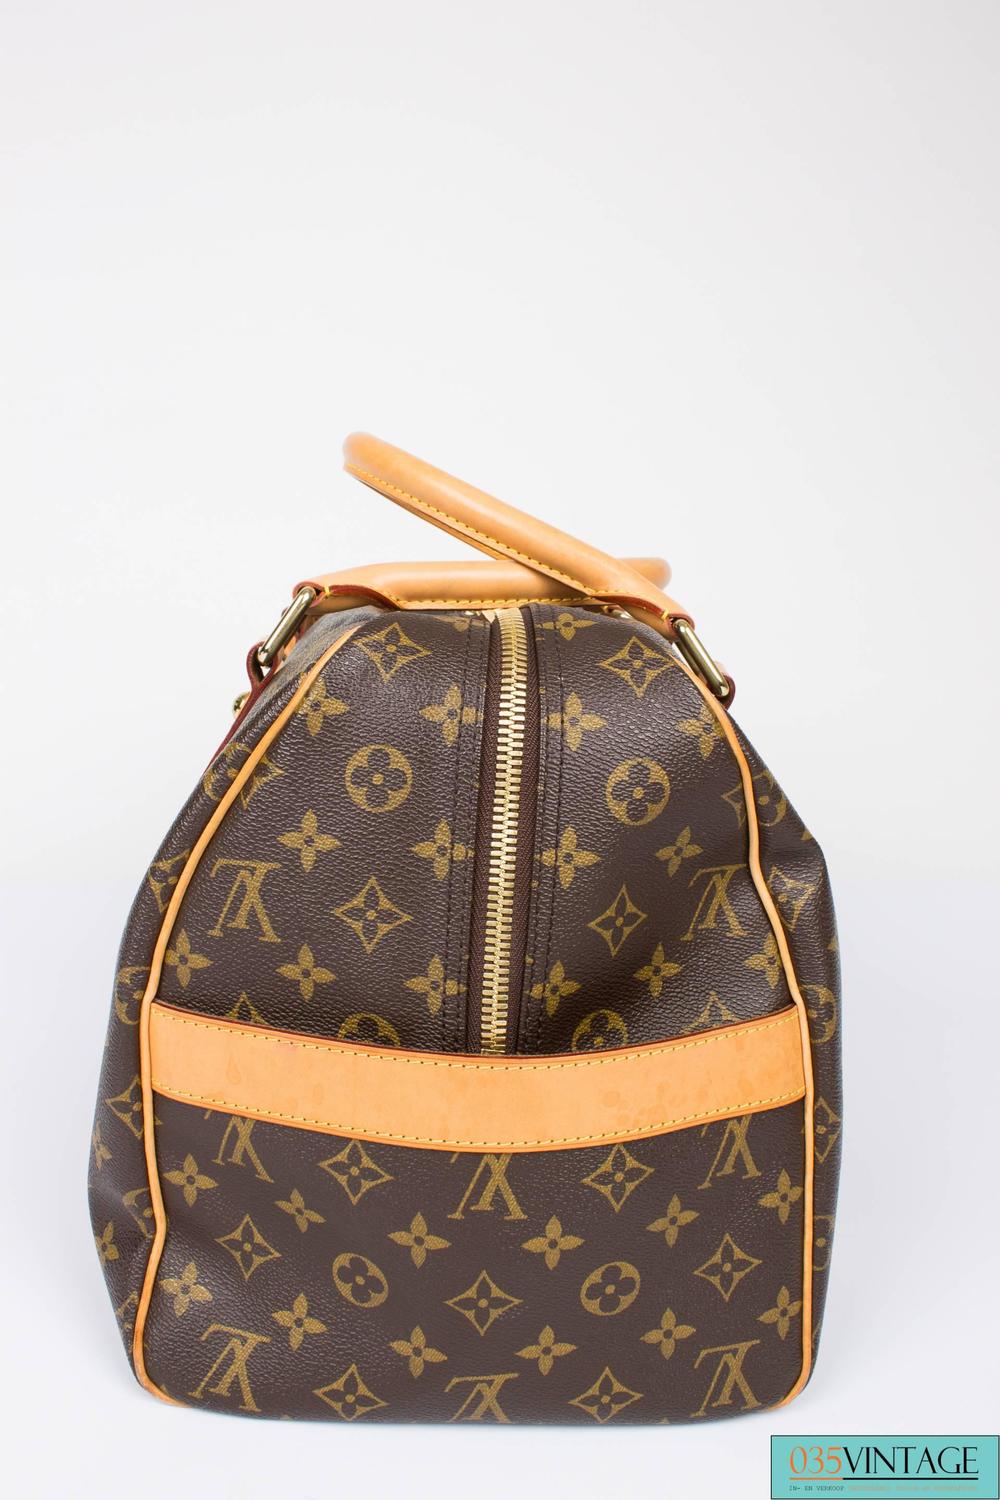 Louis Vuitton Carry All Weekend Bag - brown canvas/beige leather For Sale at 1stdibs